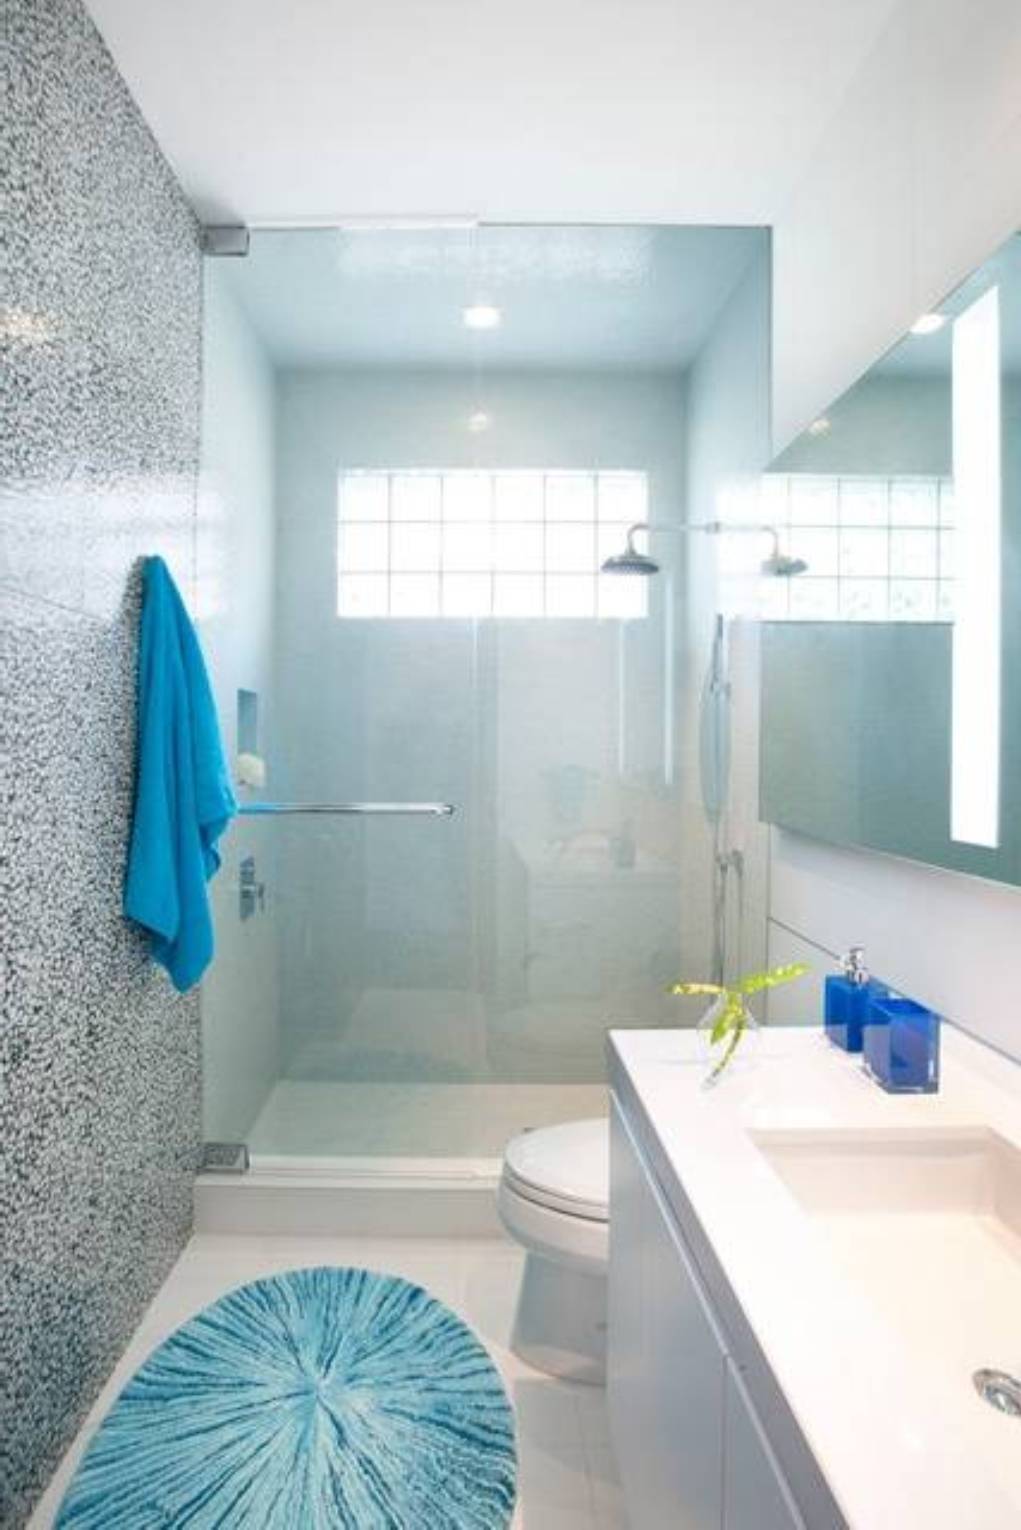 bathroom-contempo-small-bathroom-with-white-color-scheme-ideas-and-full-shower-stall-door-design-also-nice-mosaic-bathroom-accent-wall-cool-ideas-about-designing-small-bathrooms-with-photo-gallery